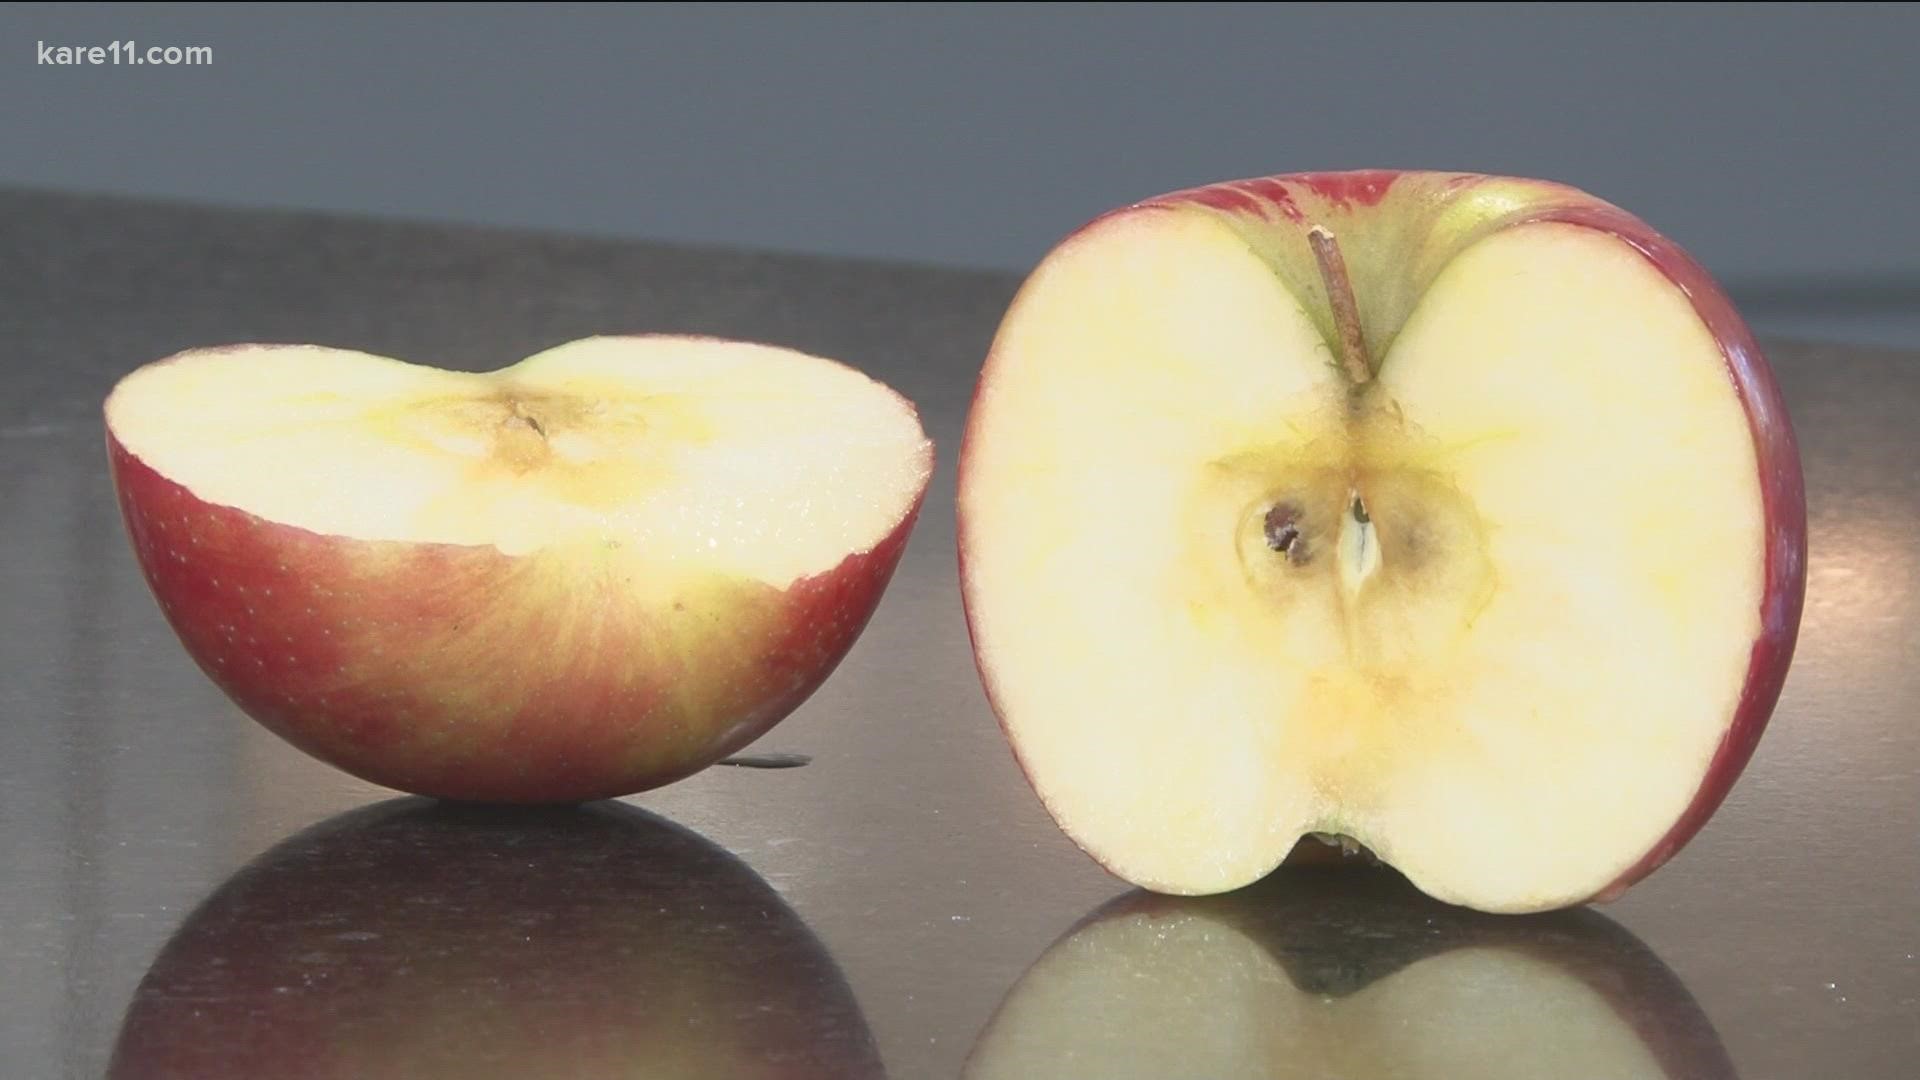 U of M researchers were able to make links through DNA, but for one parent of the beloved apple, there would never be a reunion.